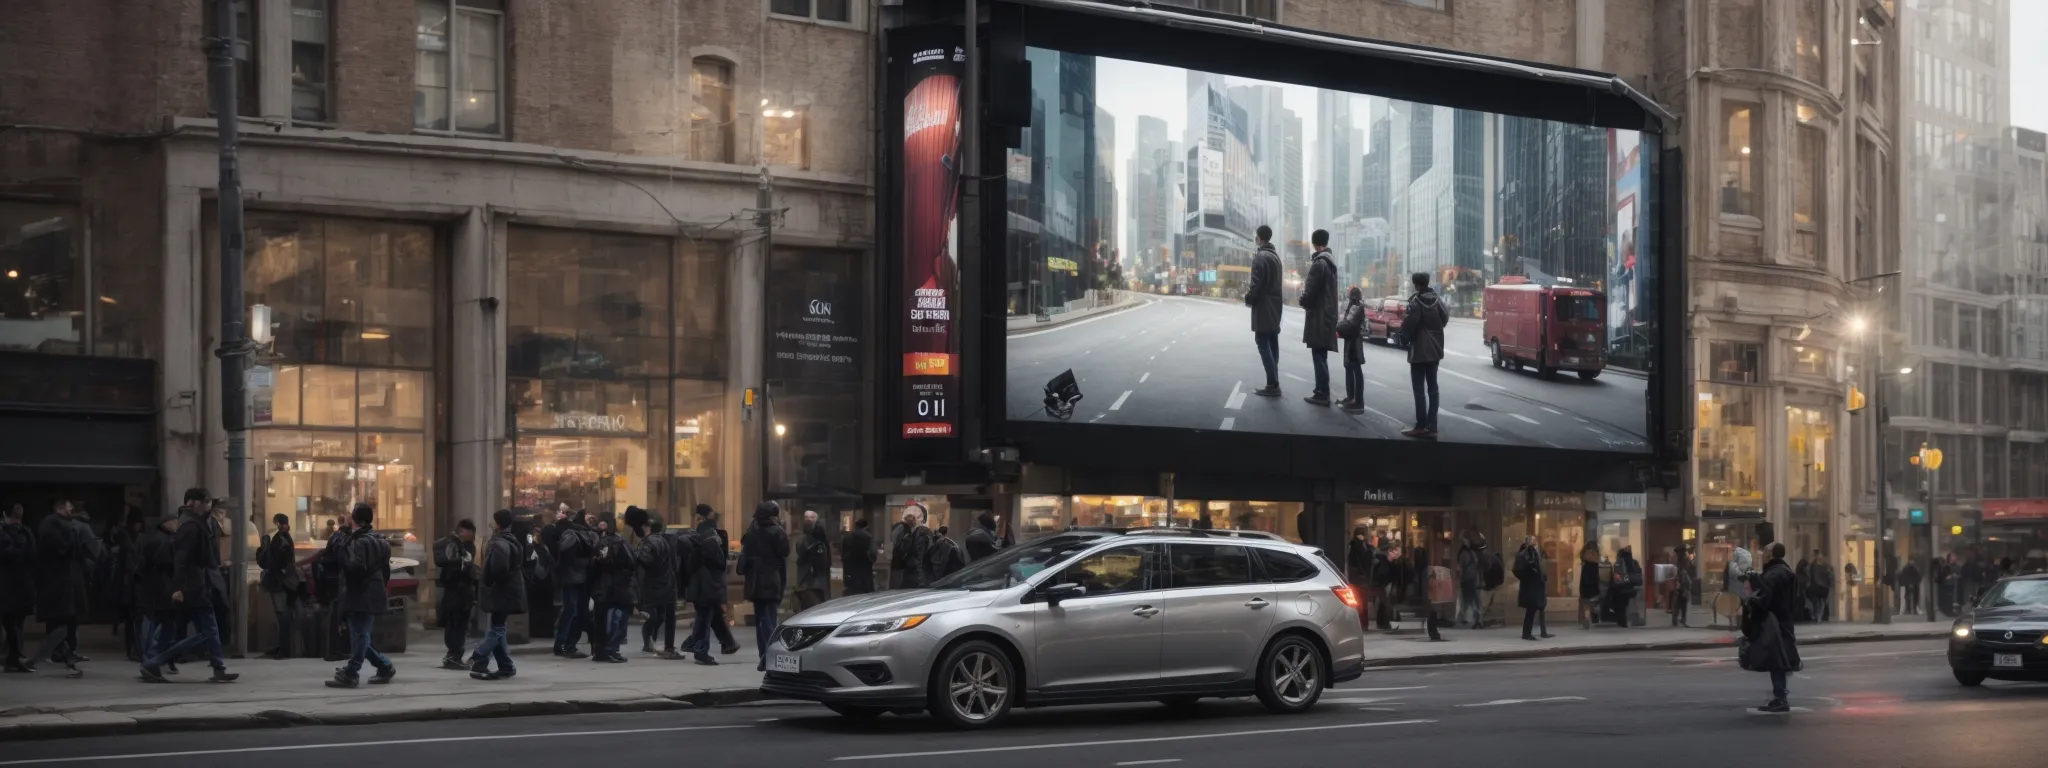 a city billboard displaying a dynamic digital advertisement interacts with smartphone-wielding passersby.